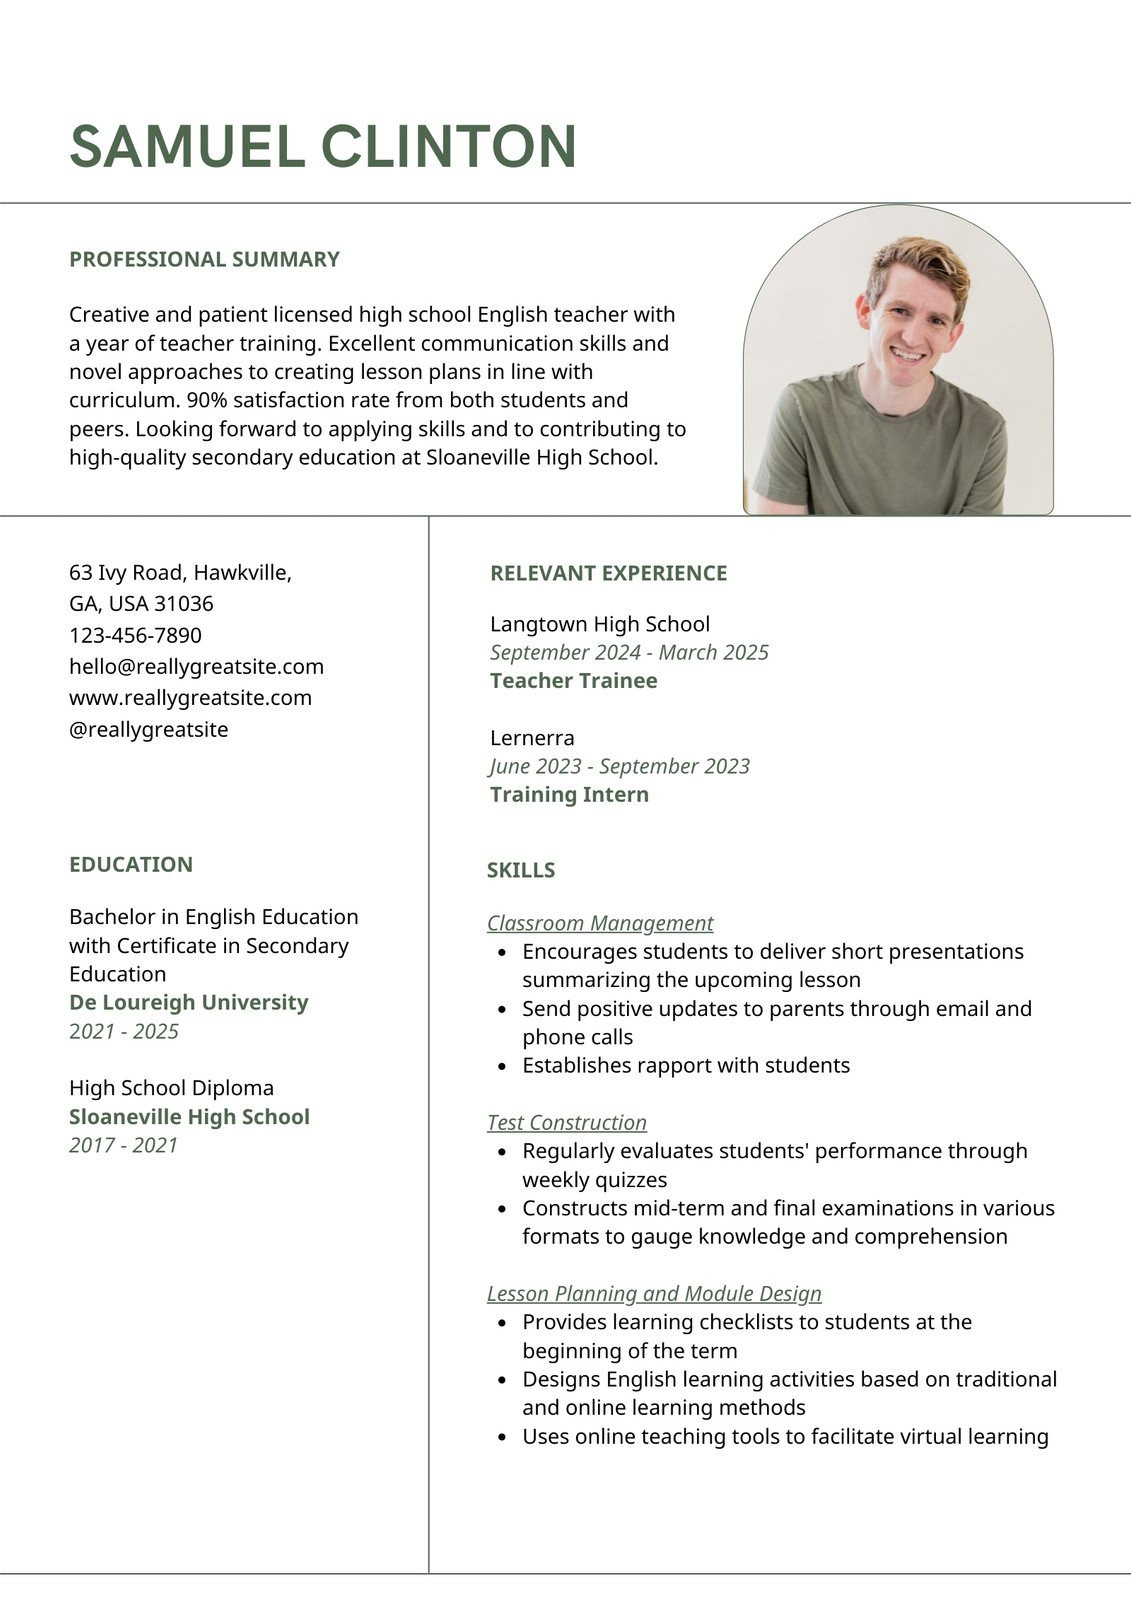 2023 Resume Summary Of Qualifications Samples Free, Printable, Customizable Photo Resume Templates Canva